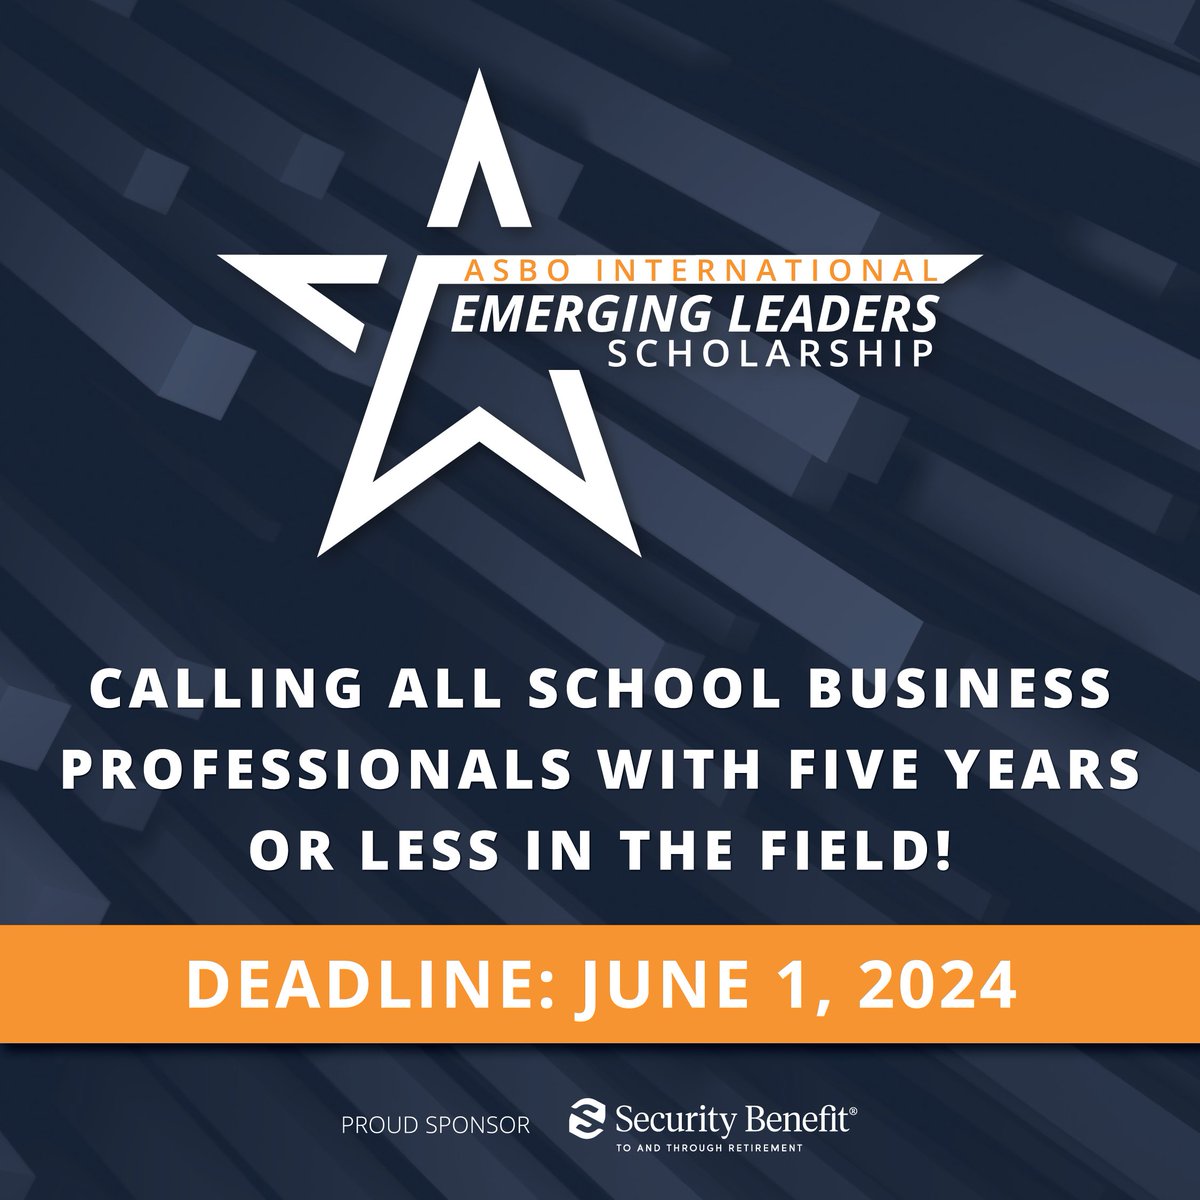 Commend a rising star in #schoolbusiness with 5 years or less in the field & help pave their way to leadership excellence! ⭐ 20 recipients will be awarded an #ASBOScholarship to attend #ASBOACE24. Deadline is June 1: asbointl.org/scholarship Proud Sponsor: @securitybenefit